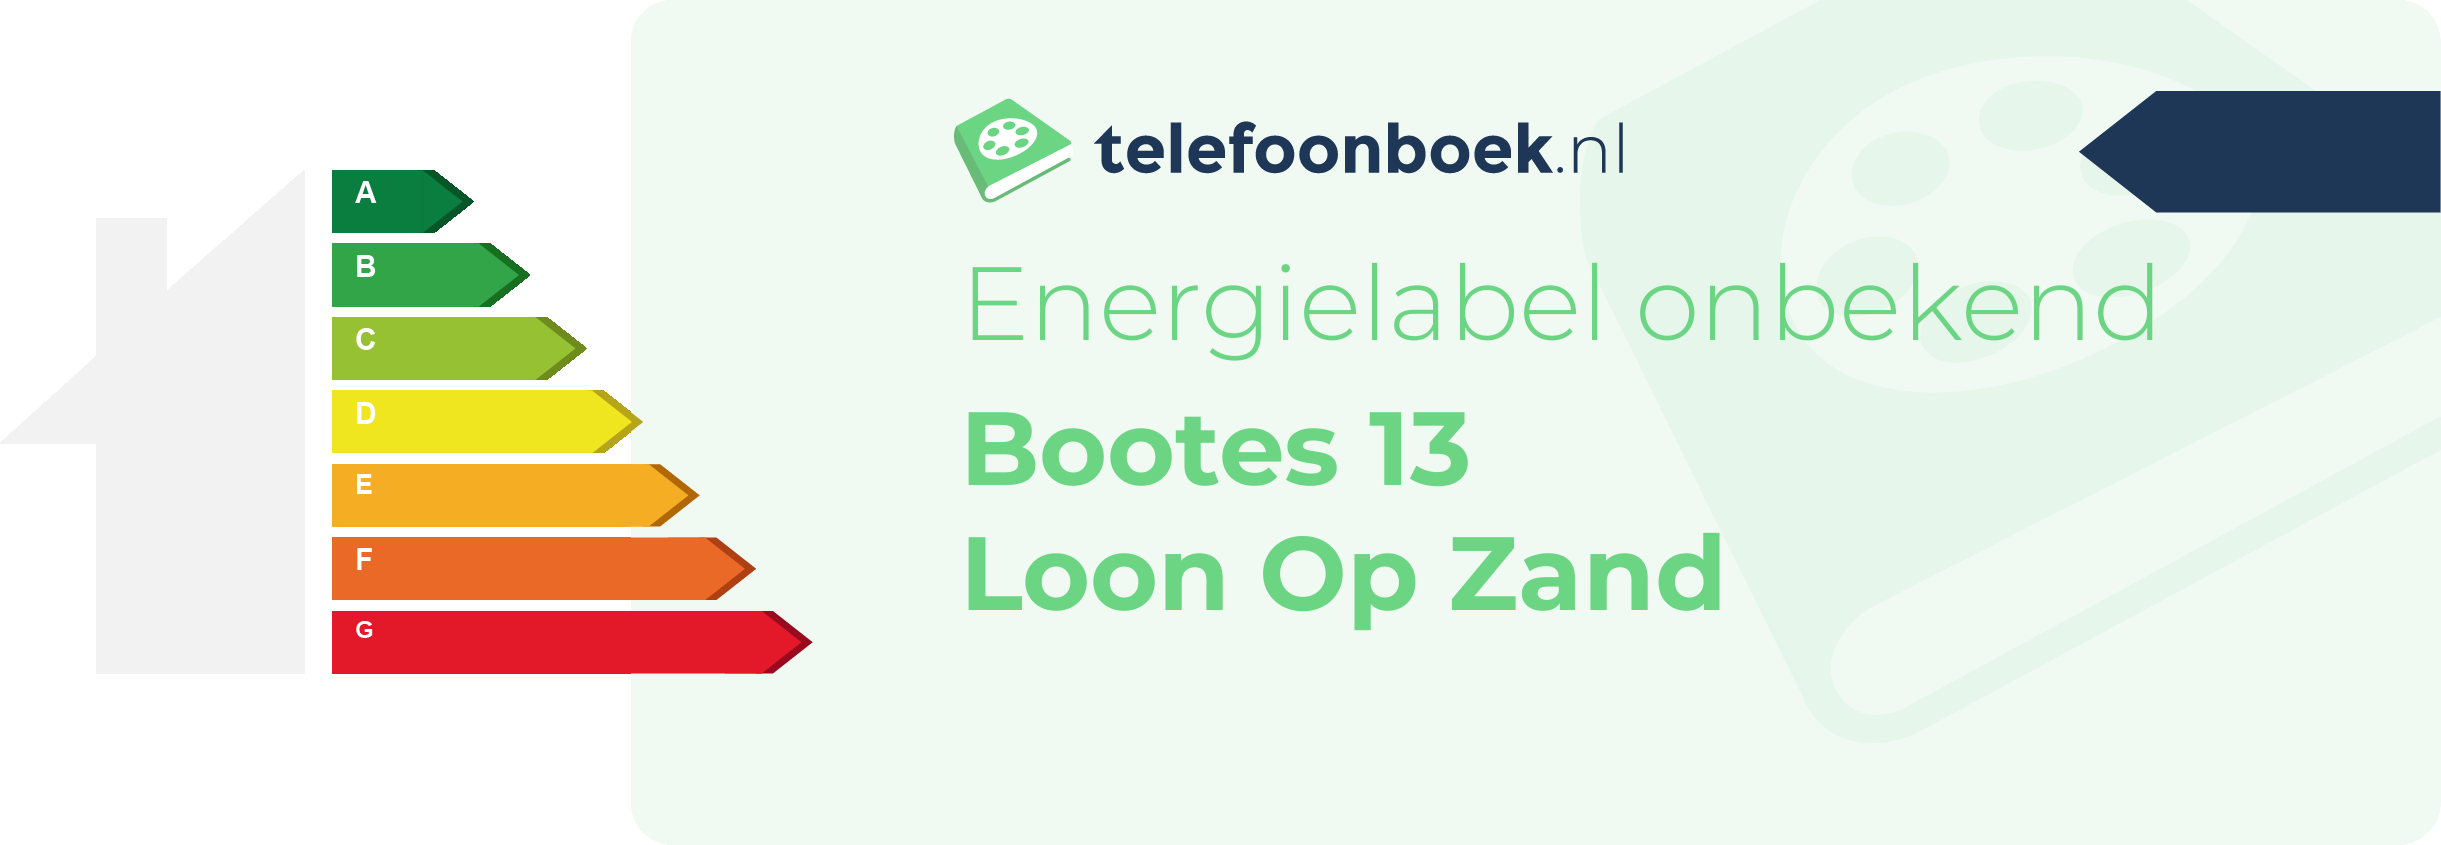 Energielabel Bootes 13 Loon Op Zand